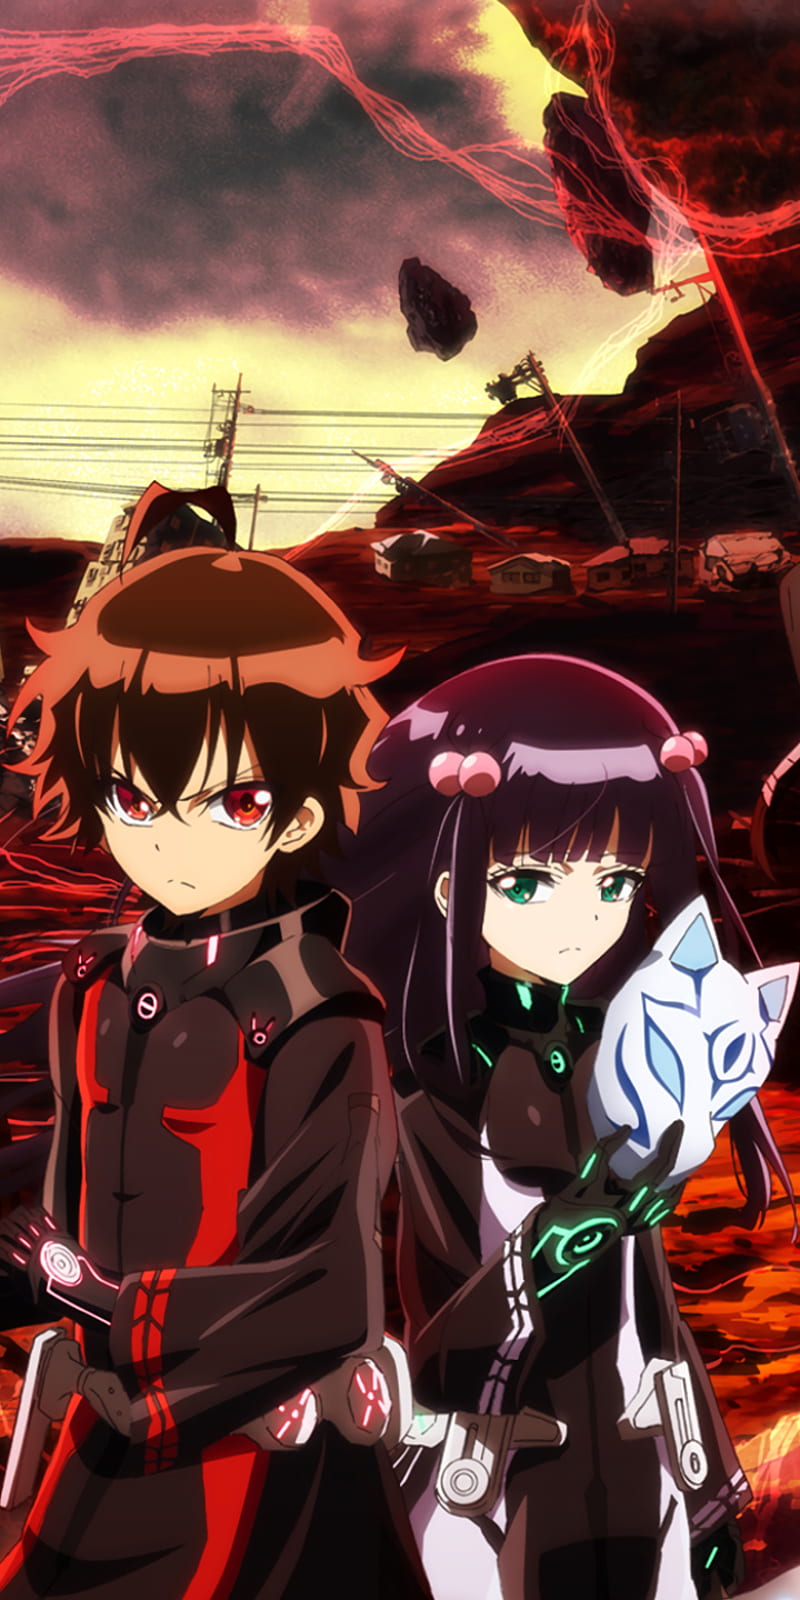 Twin Star Exorcists – All the Anime